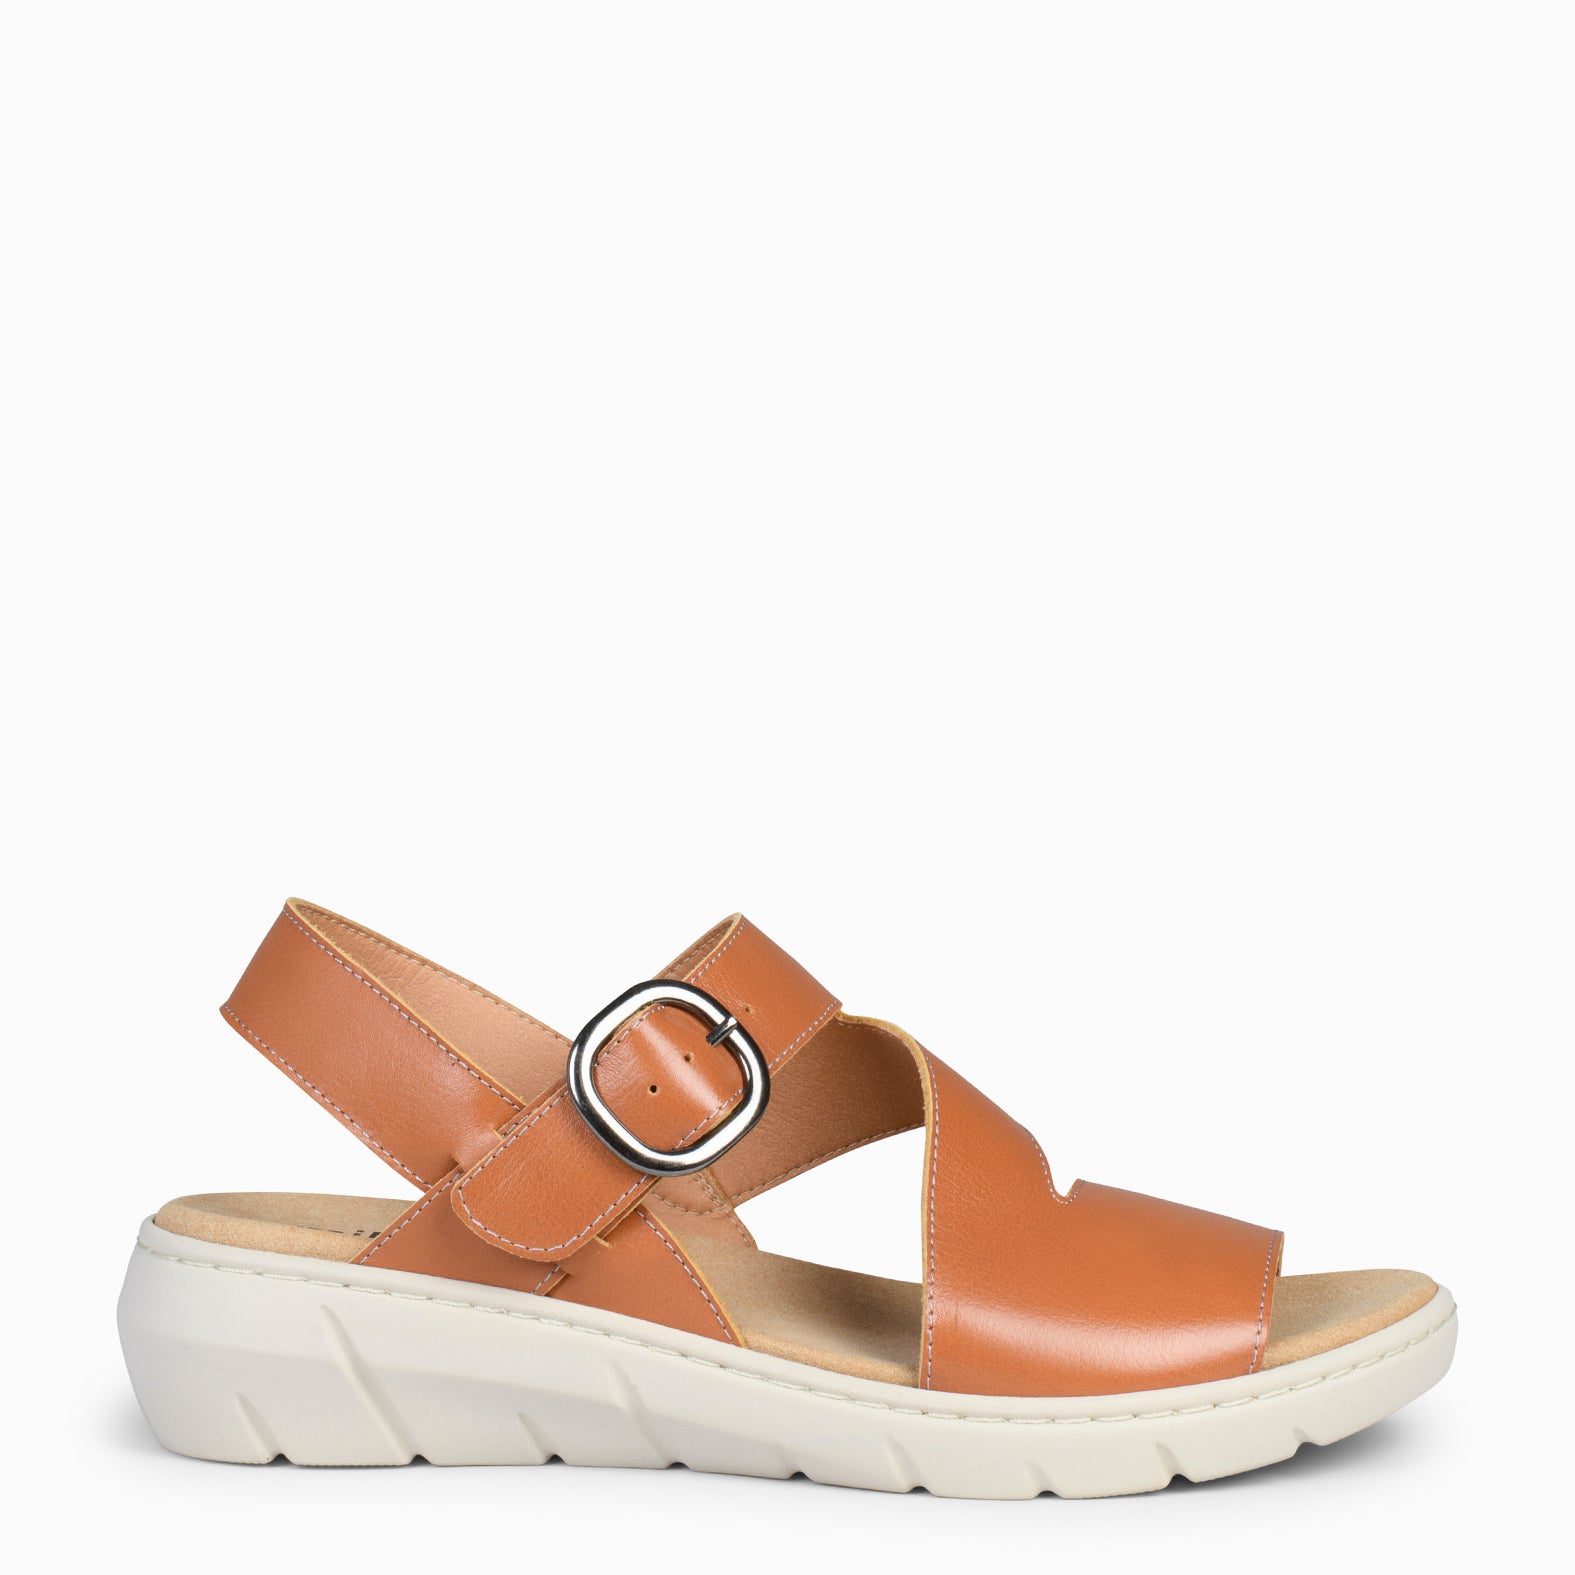 NATURA – CAMEL sandals with removable insole